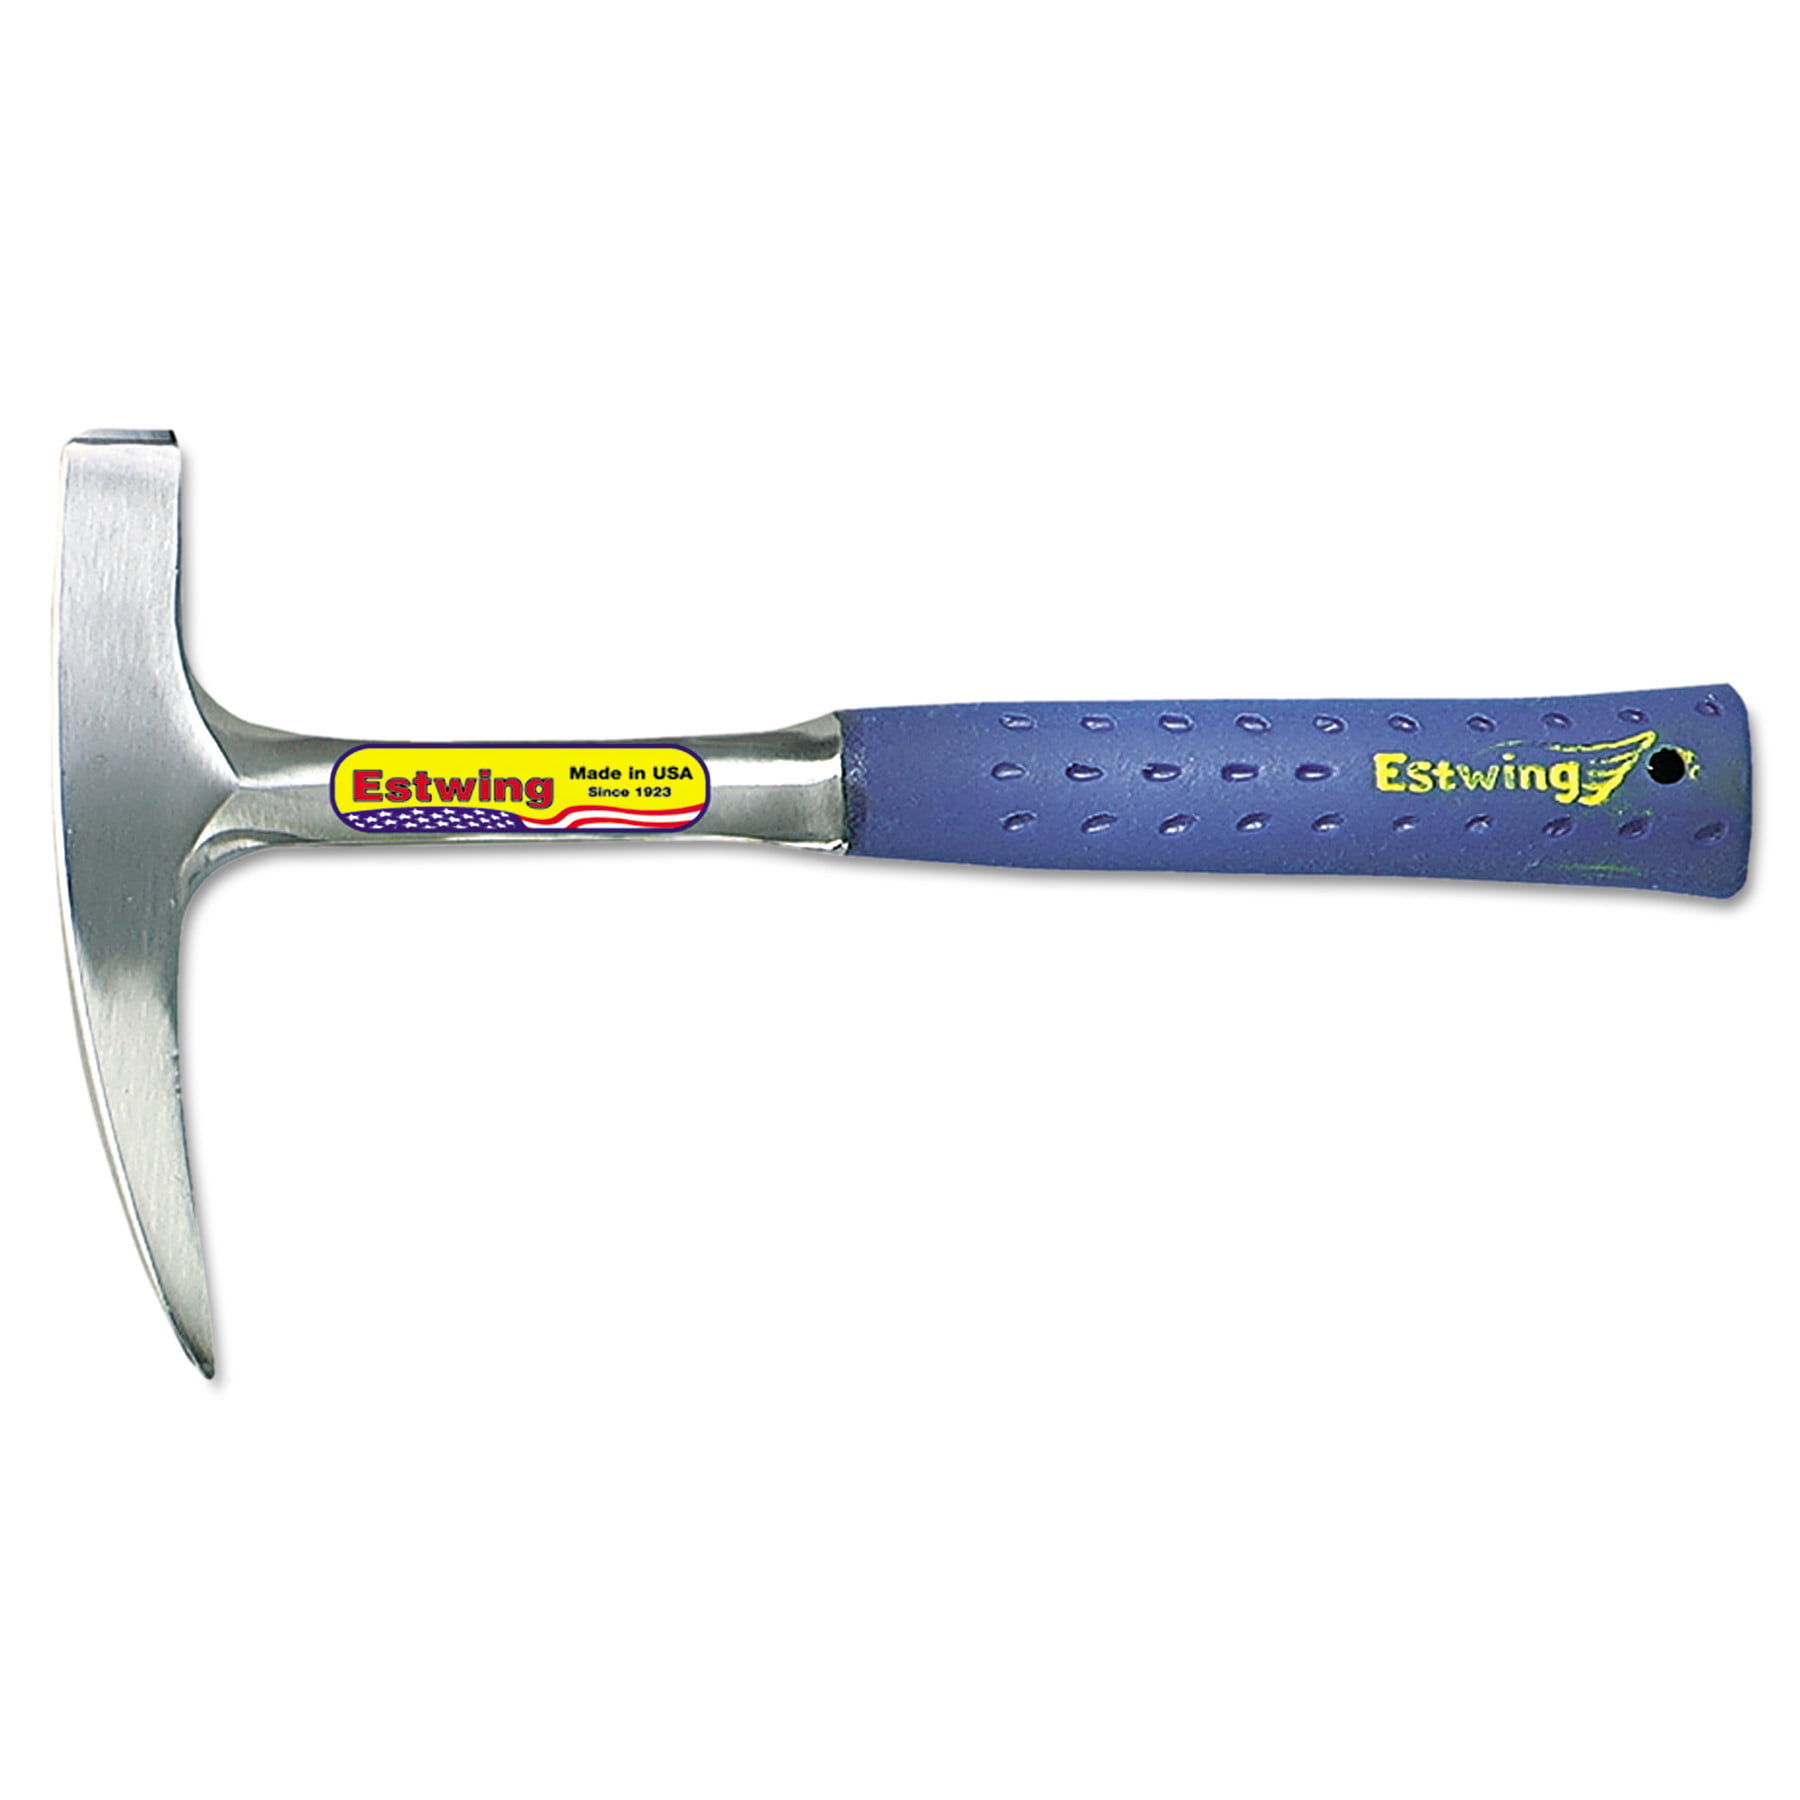 Estwing E3-22P 22 oz Geological Hammer w Pointed Tip & Shock Reduction Grip 